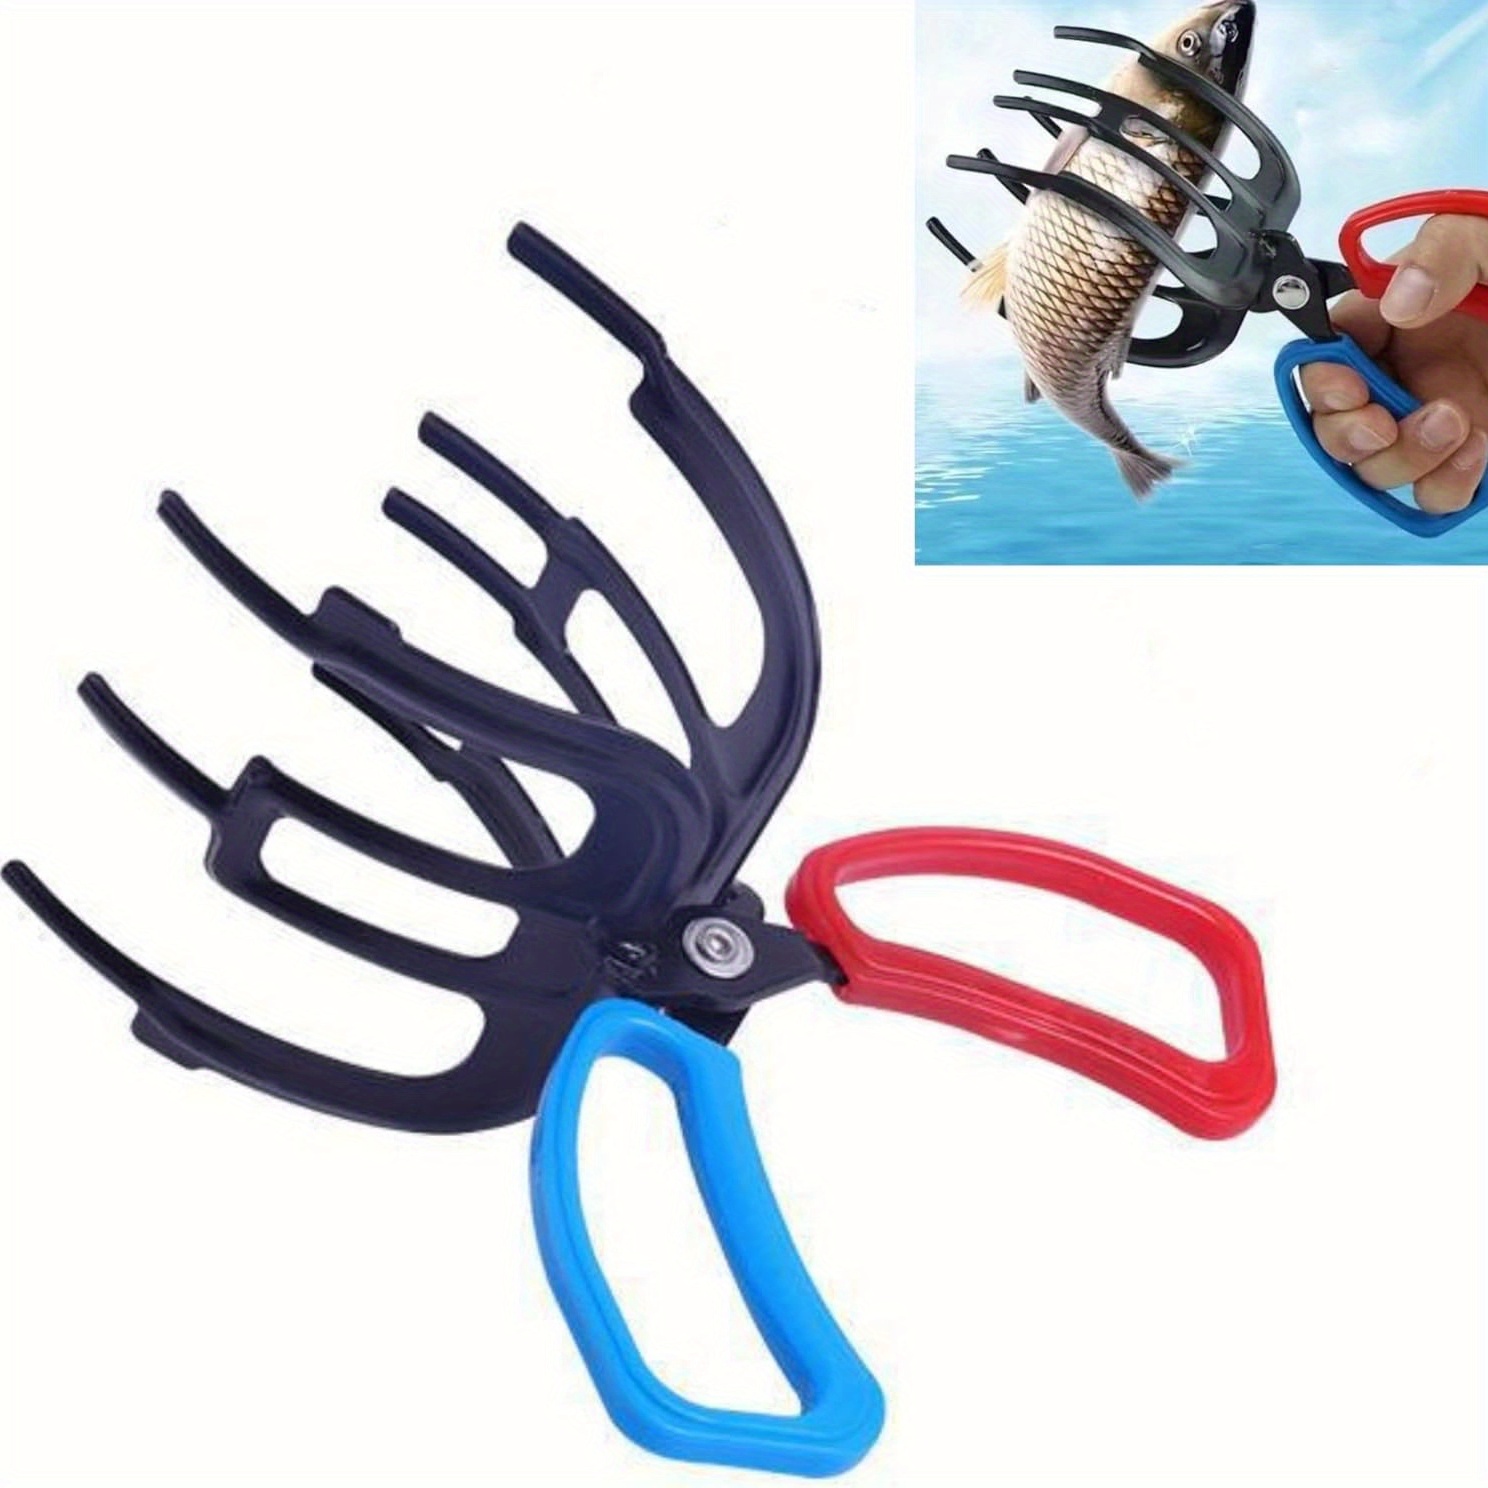 Bluewing 10 inch Fishing Gripper 1pc Fish Lip Gripper Aluminum Alloy Fish Catcher Fish Grabber with Coiled Lanyard